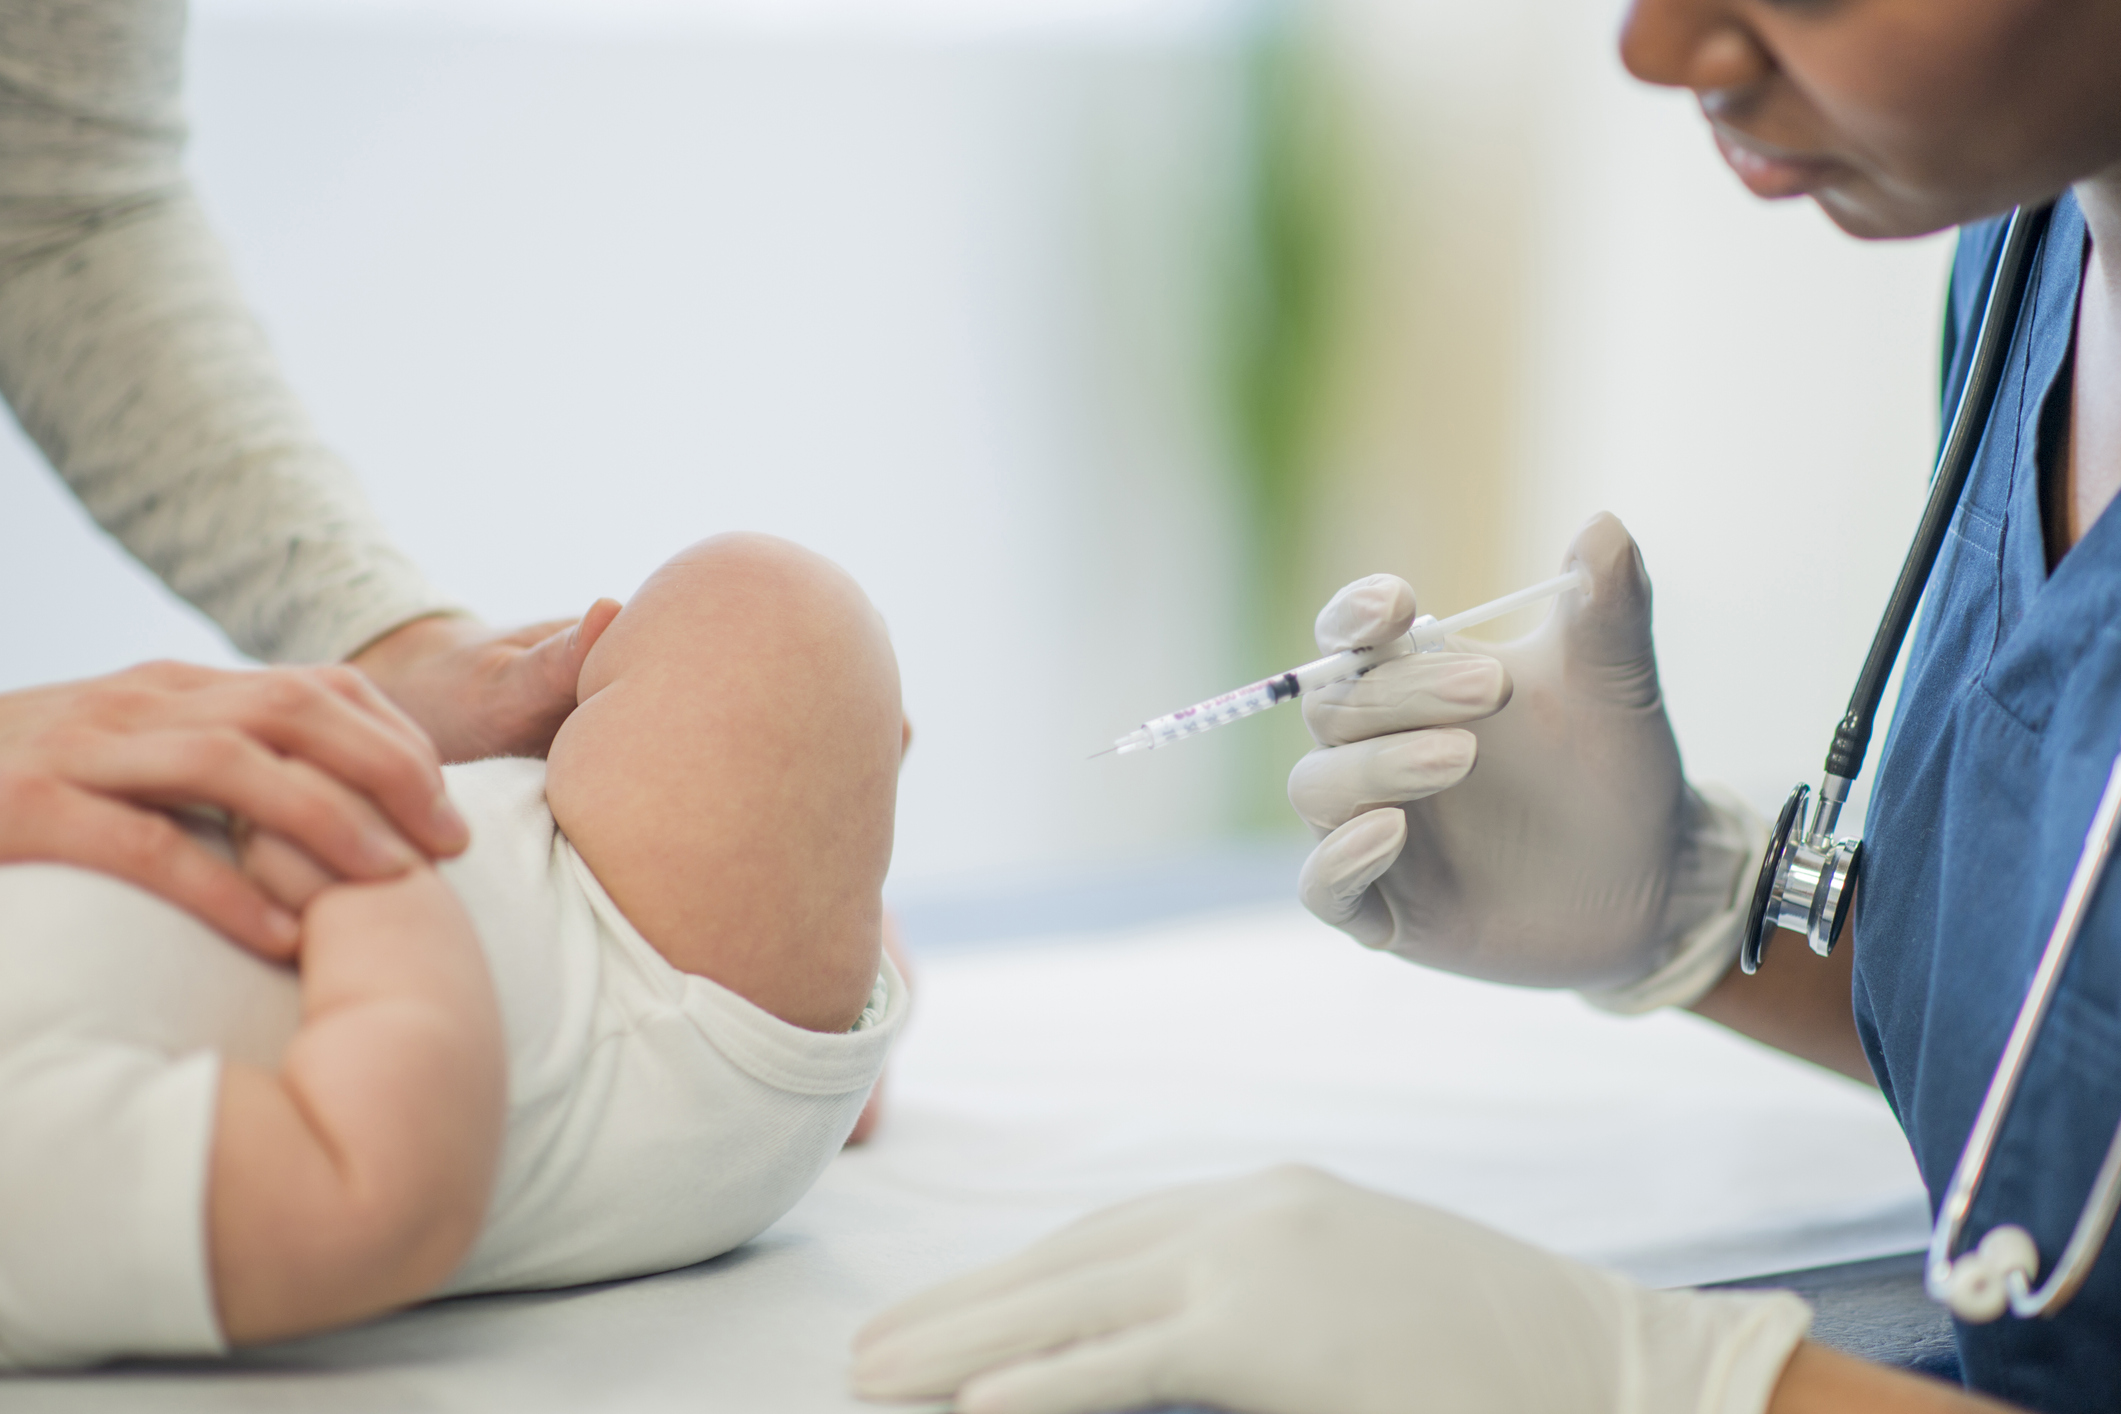 A baby receiving a vaccine injection.